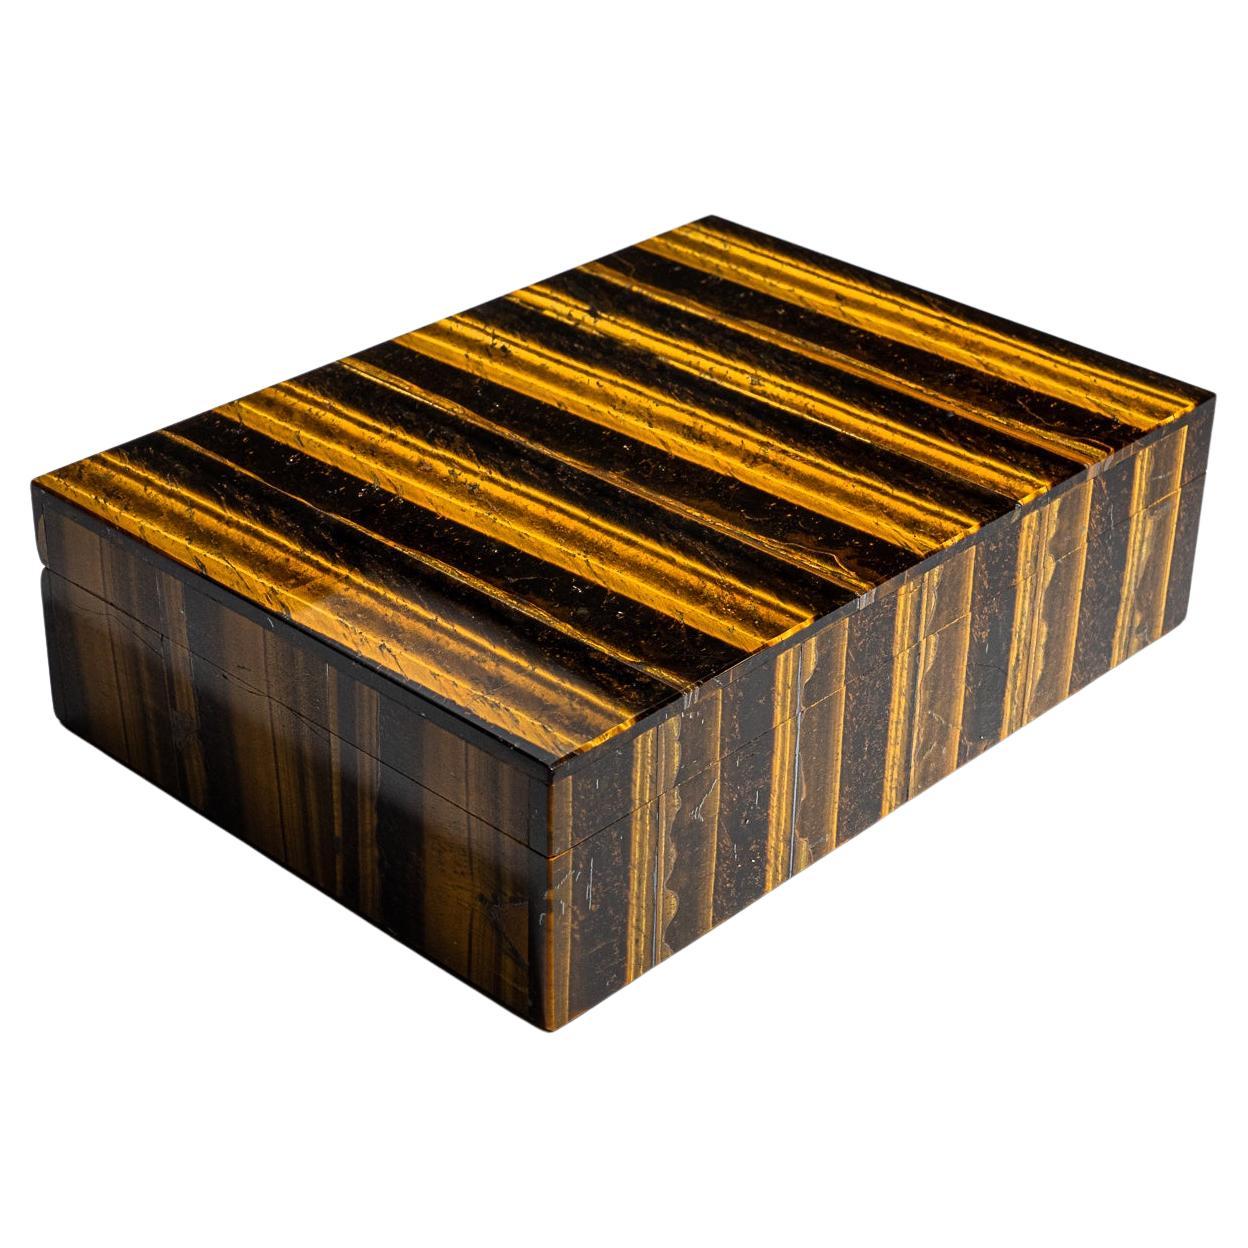 Genuine Tiger's Eye Jewelry Box from Africa (2.15 lbs) 